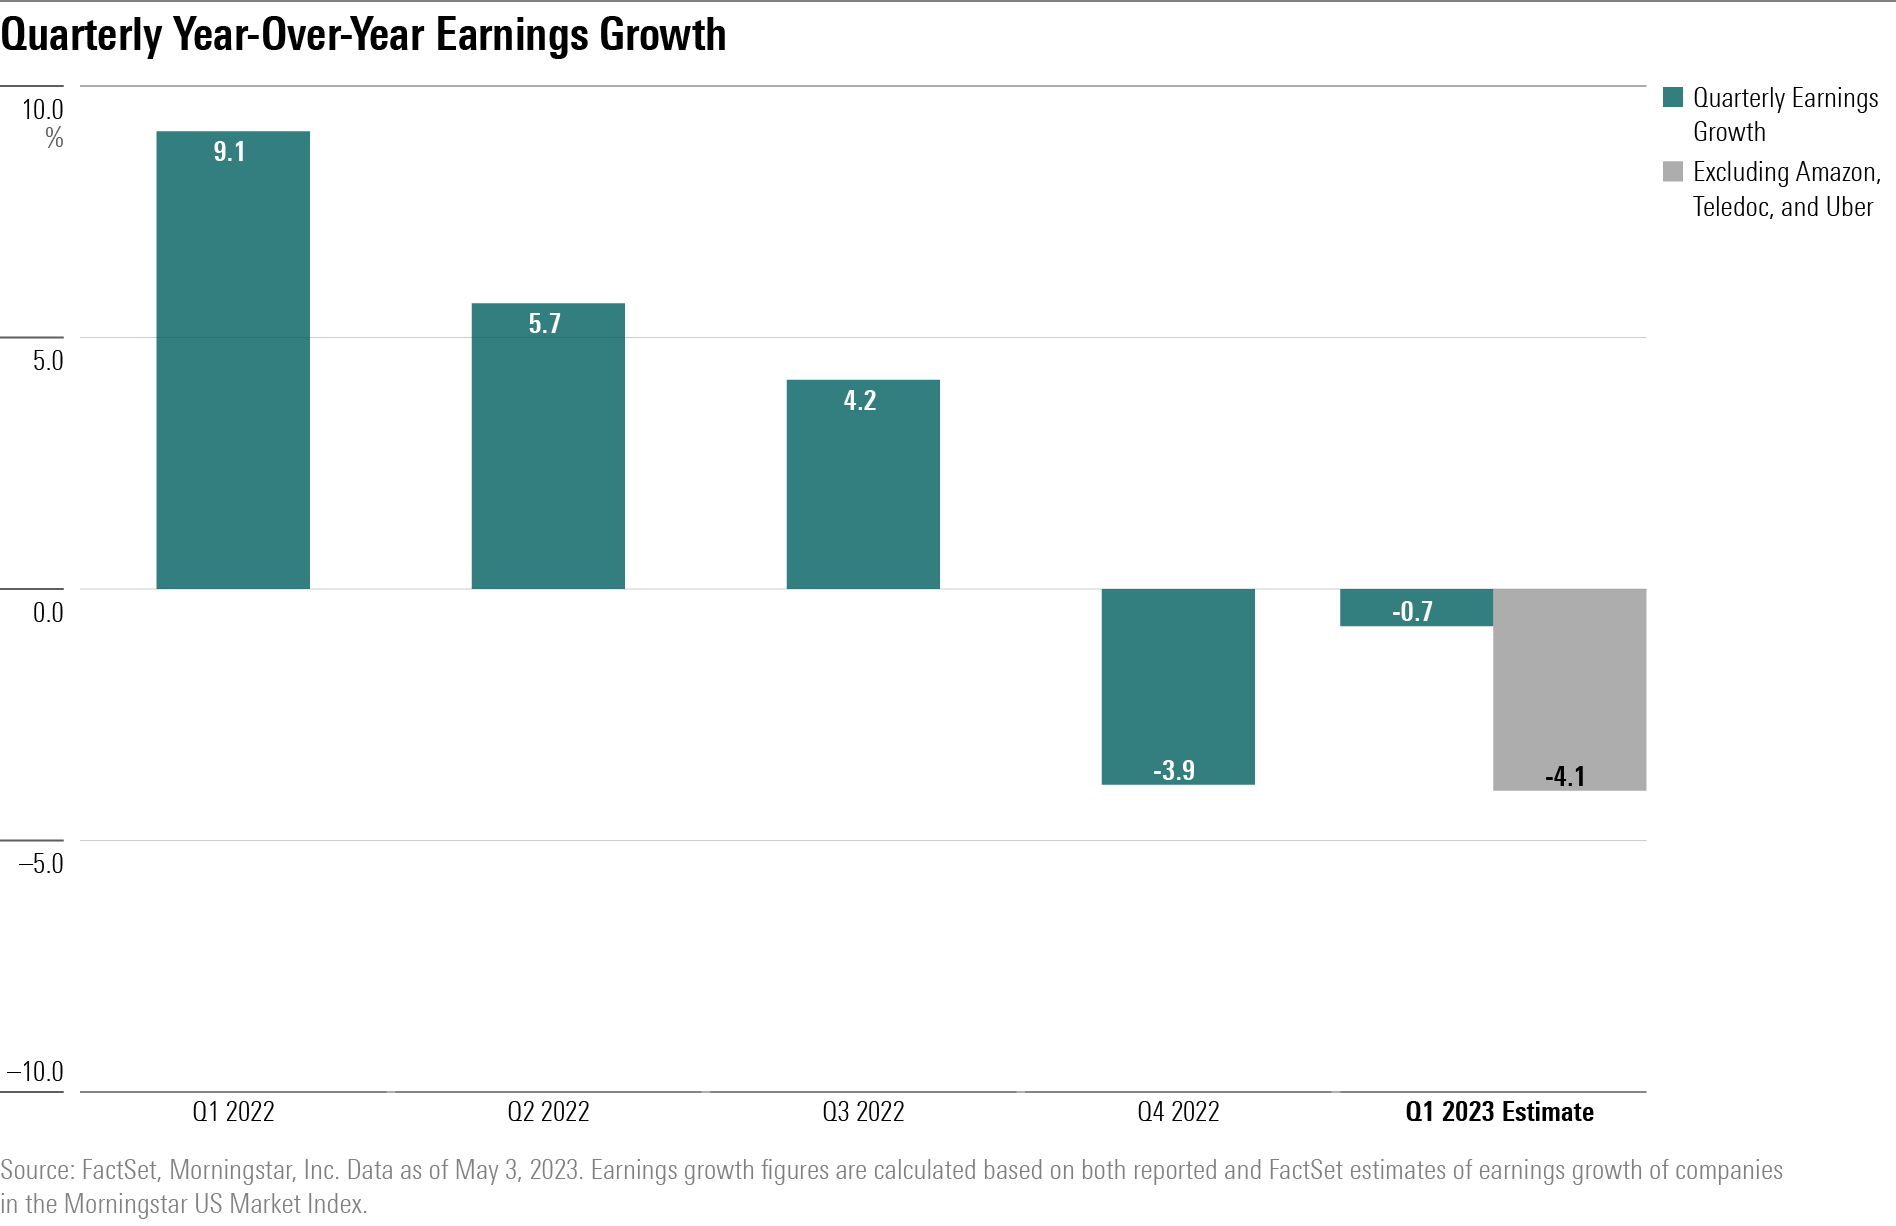 A bar chart showing quarterly year-over-year earnings growth for companies in the Morningstar U.S. Market Index.